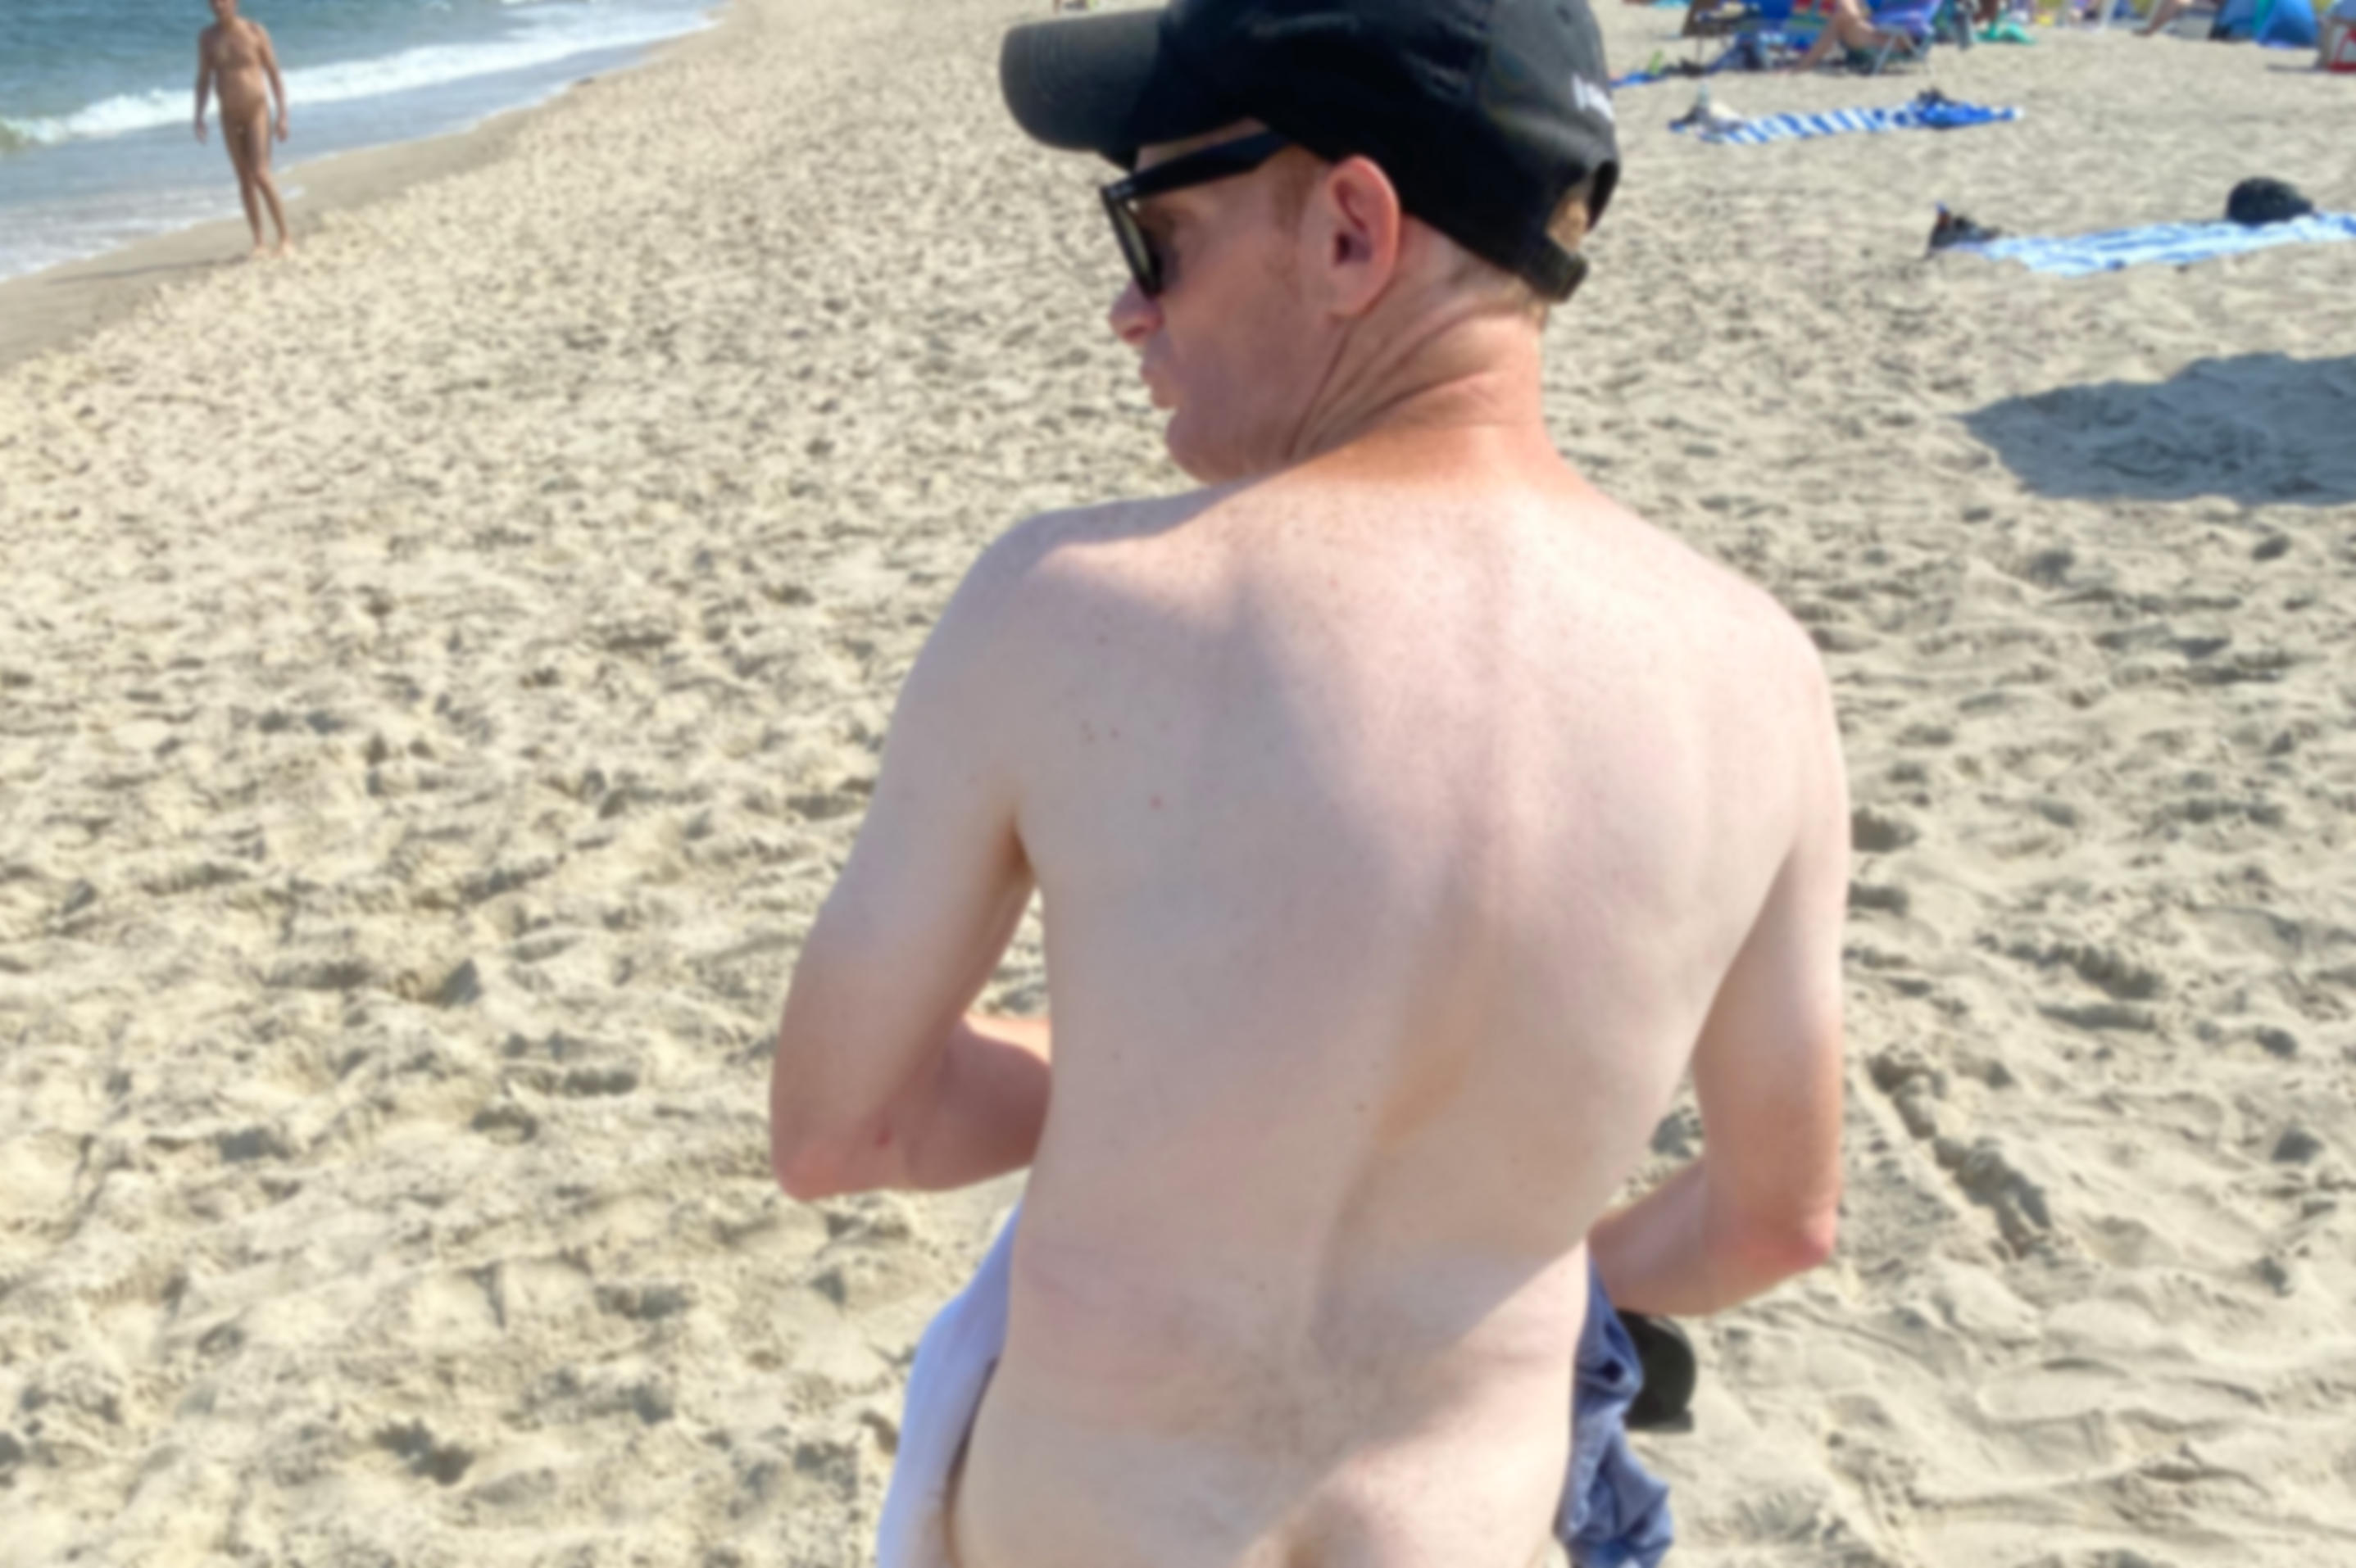 Drunk Party Naked Beach Videos - Medicated Pete Fulfills His Dream of Visiting a Nude Beach | Howard Stern